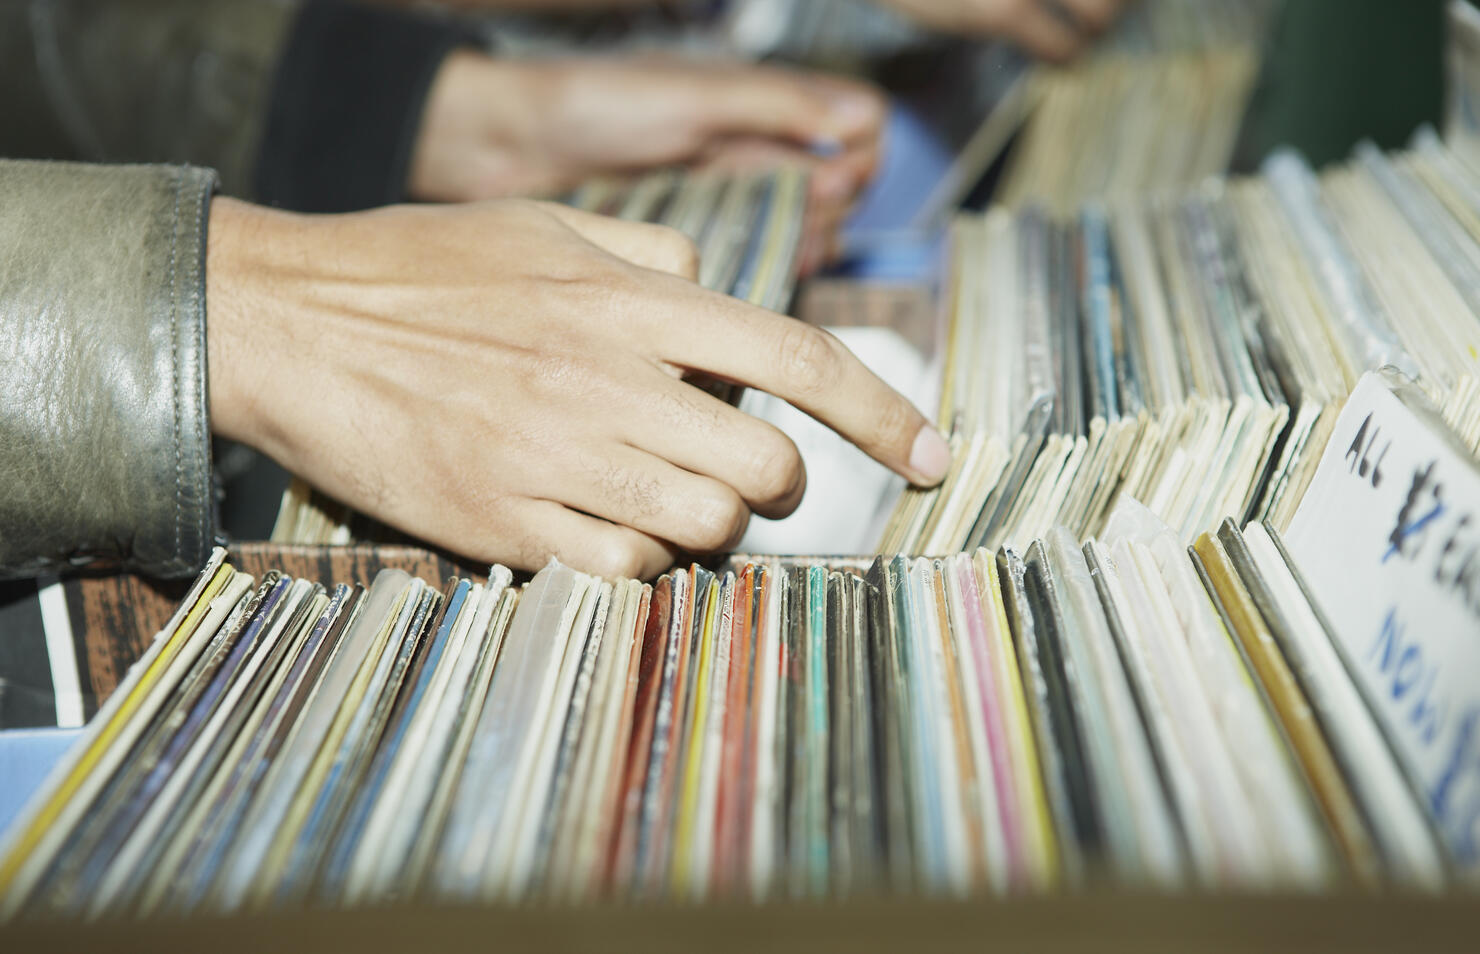 CU on hands searching through vintage records 